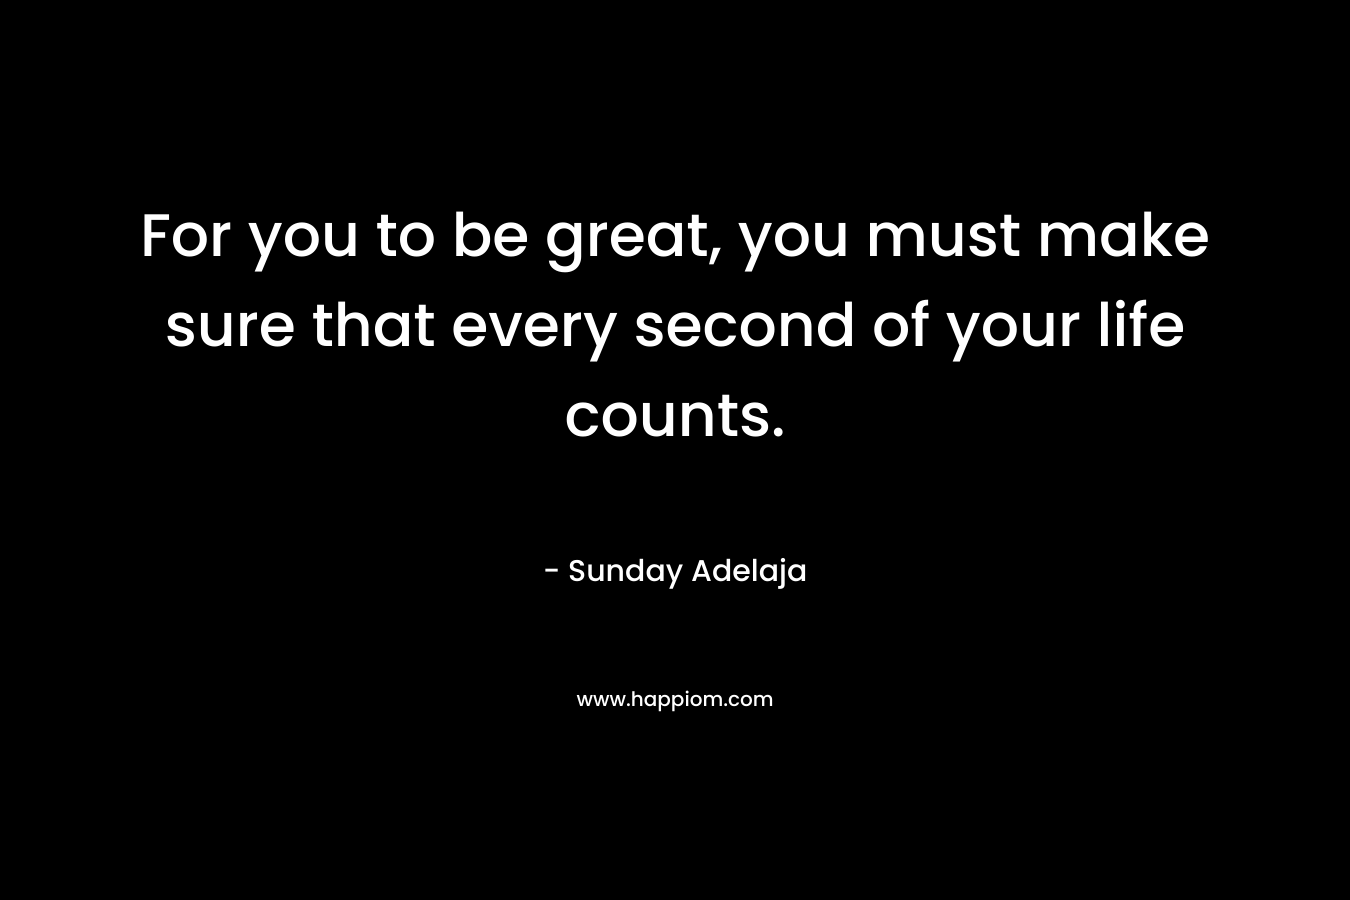 For you to be great, you must make sure that every second of your life counts.